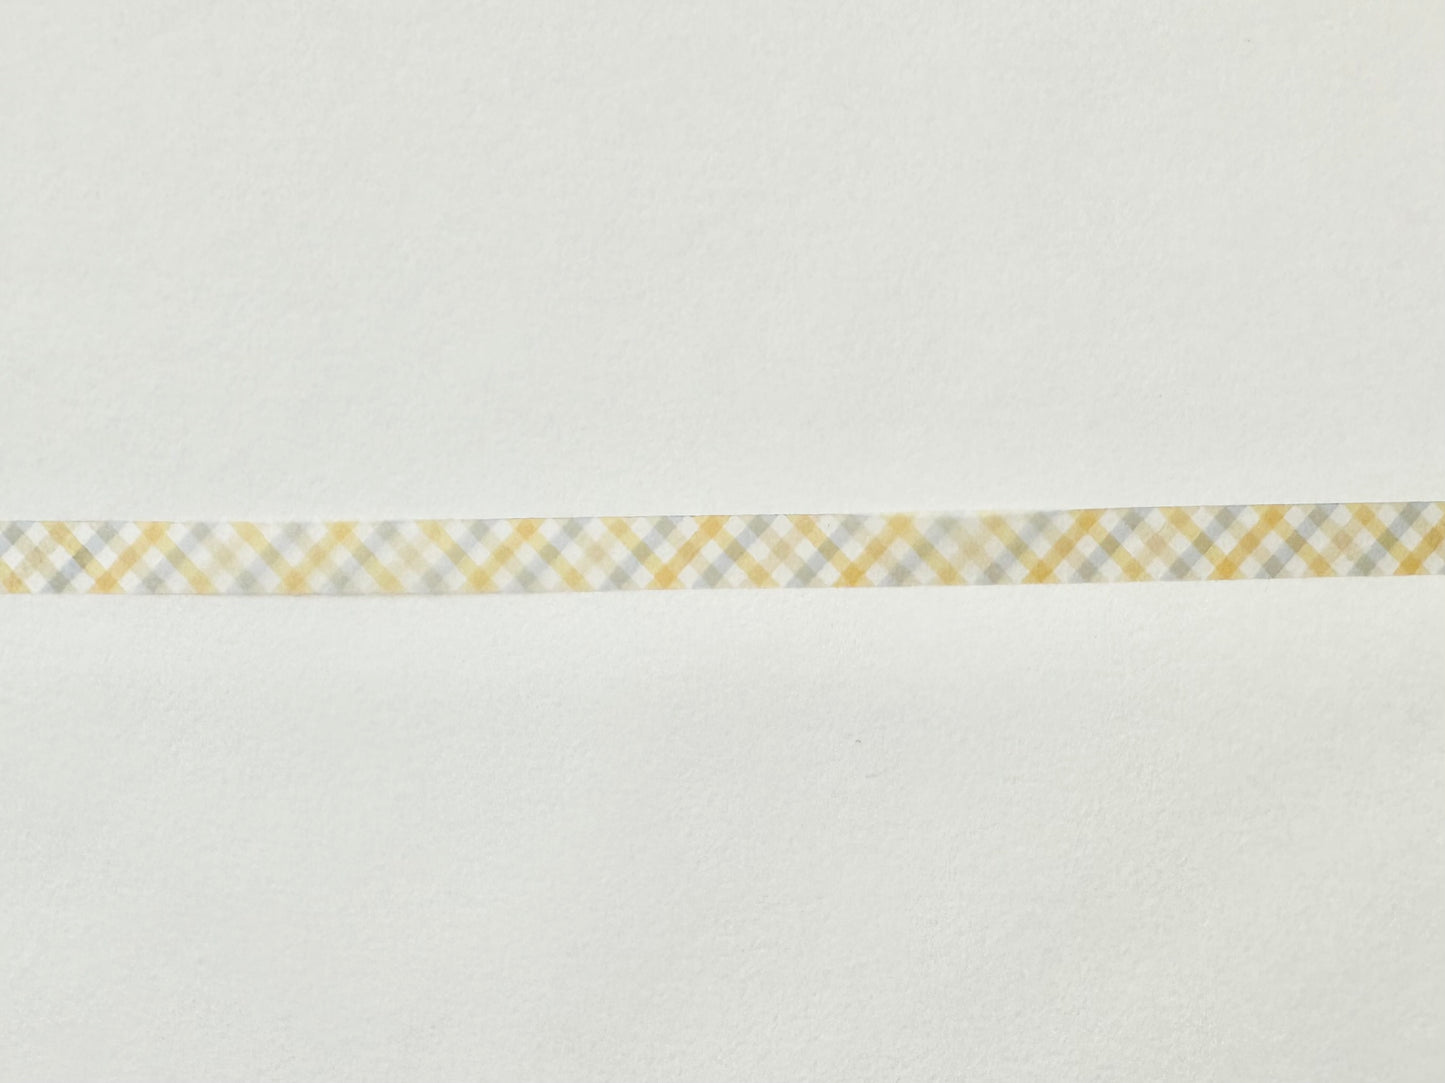 Cleartape 7mm Yellow Gingham